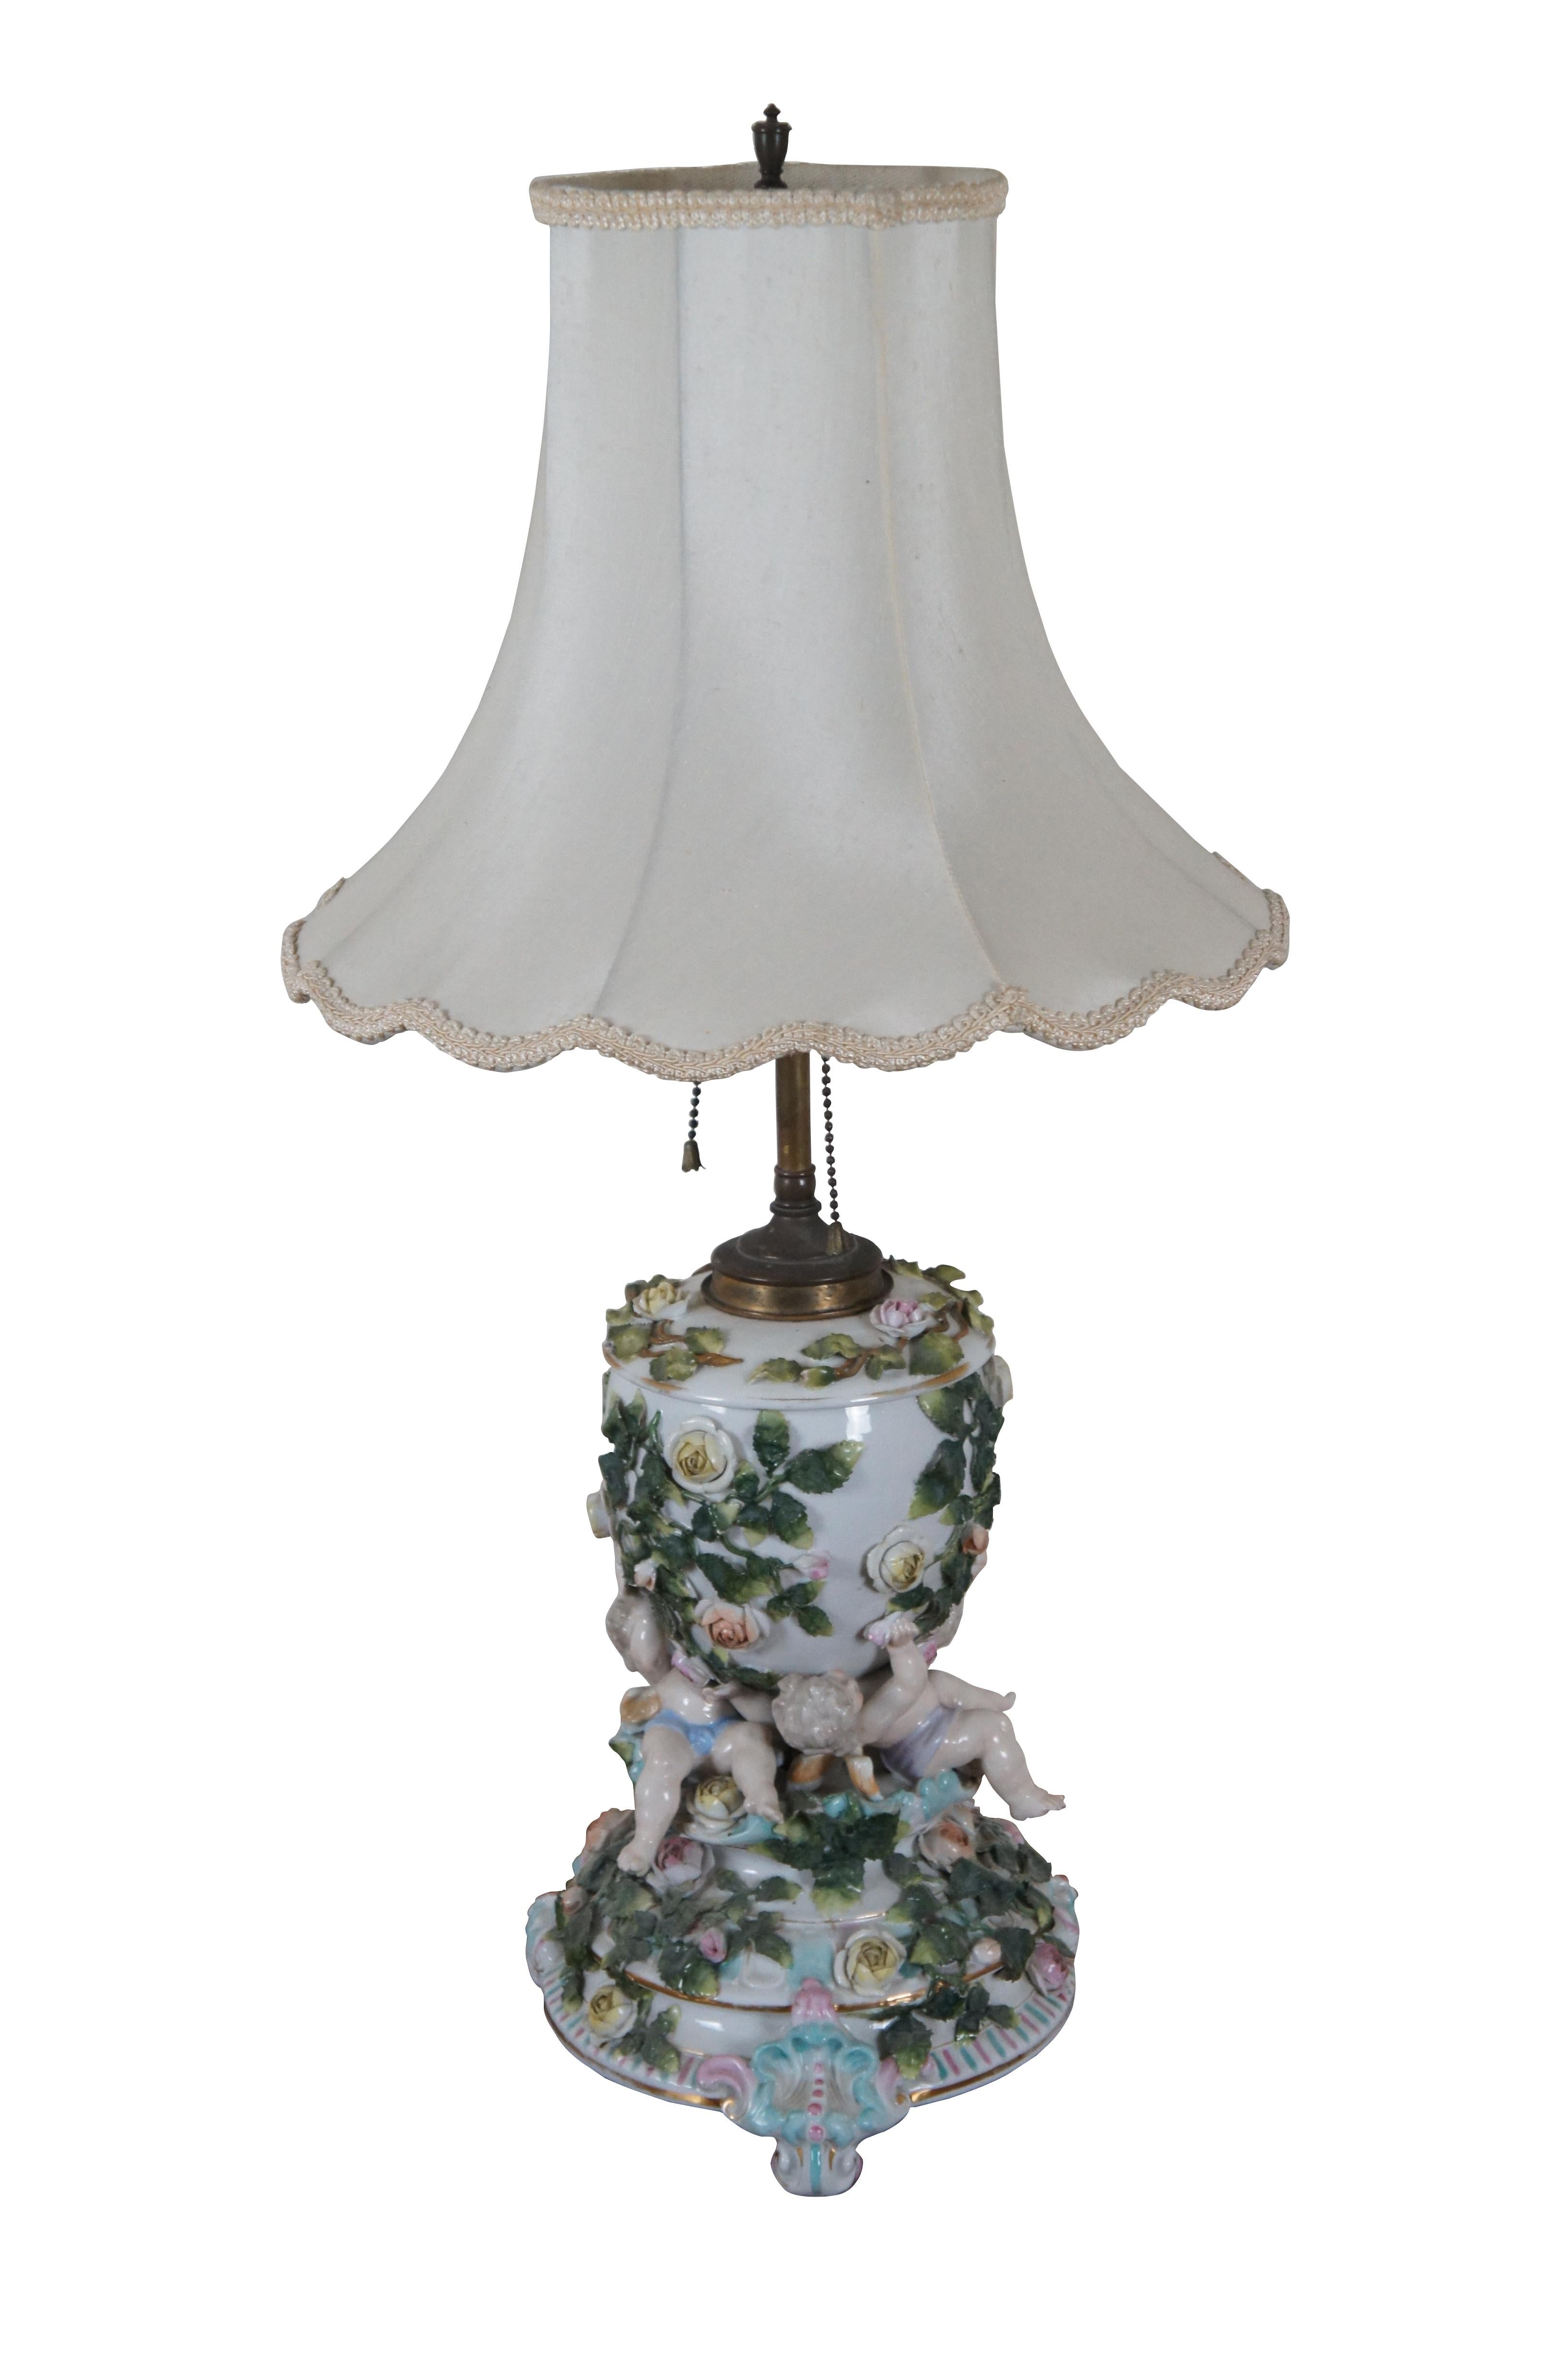 Antique German Sitzendorf Dresden converted oil lamp mantel trophy urn featuring a design of climbing roses and reclining cherubs. Marked on base with crossed lines, circa 1884 - 1902. Includes round white scalloped edge shade with braided